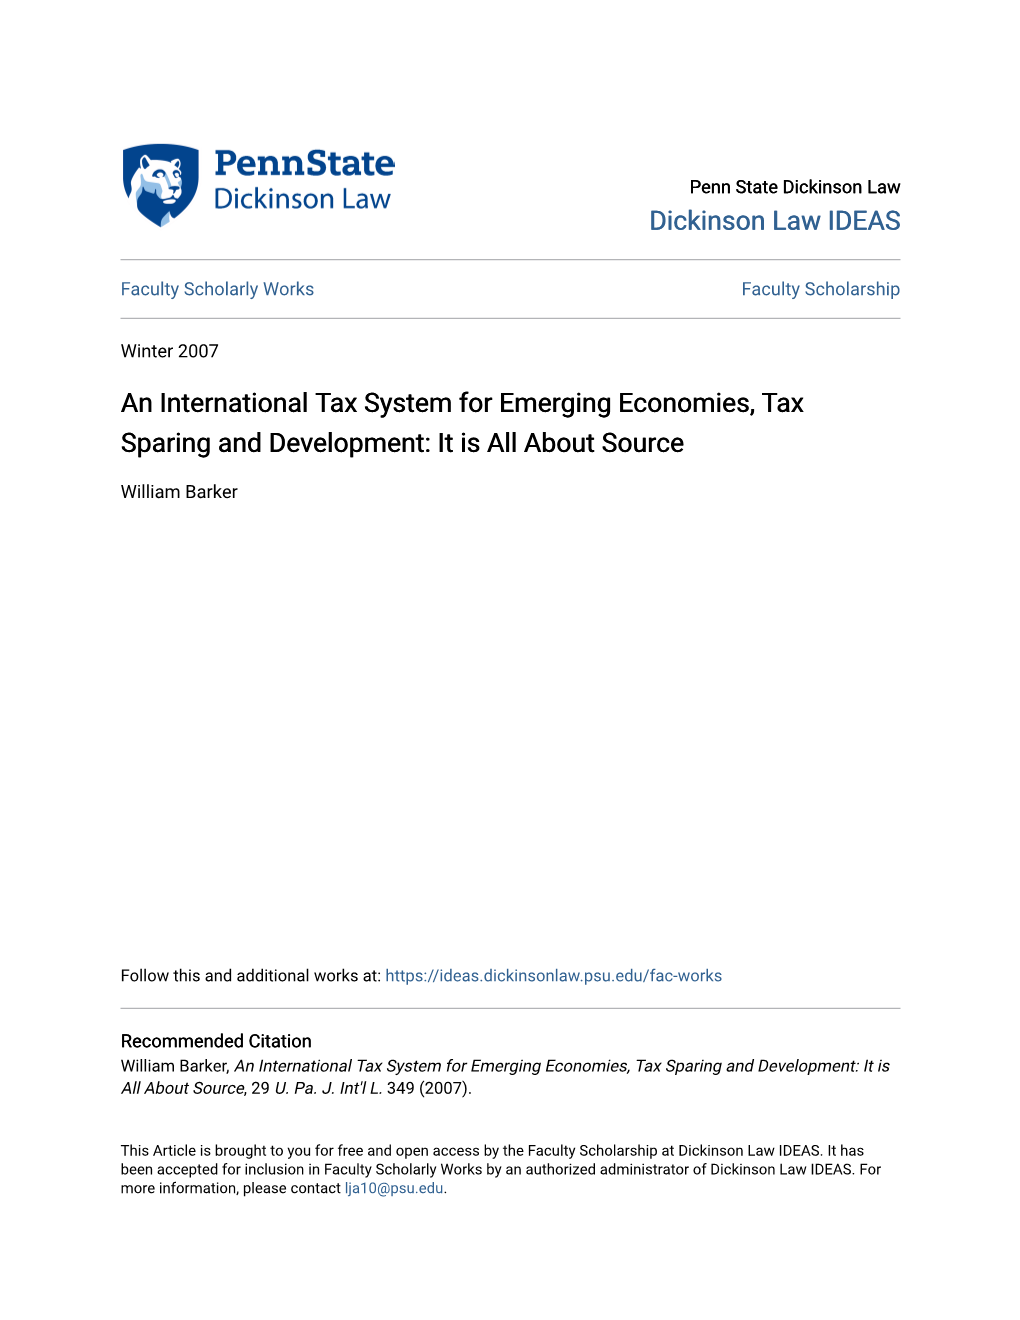 An International Tax System for Emerging Economies, Tax Sparing and Development: It Is All About Source